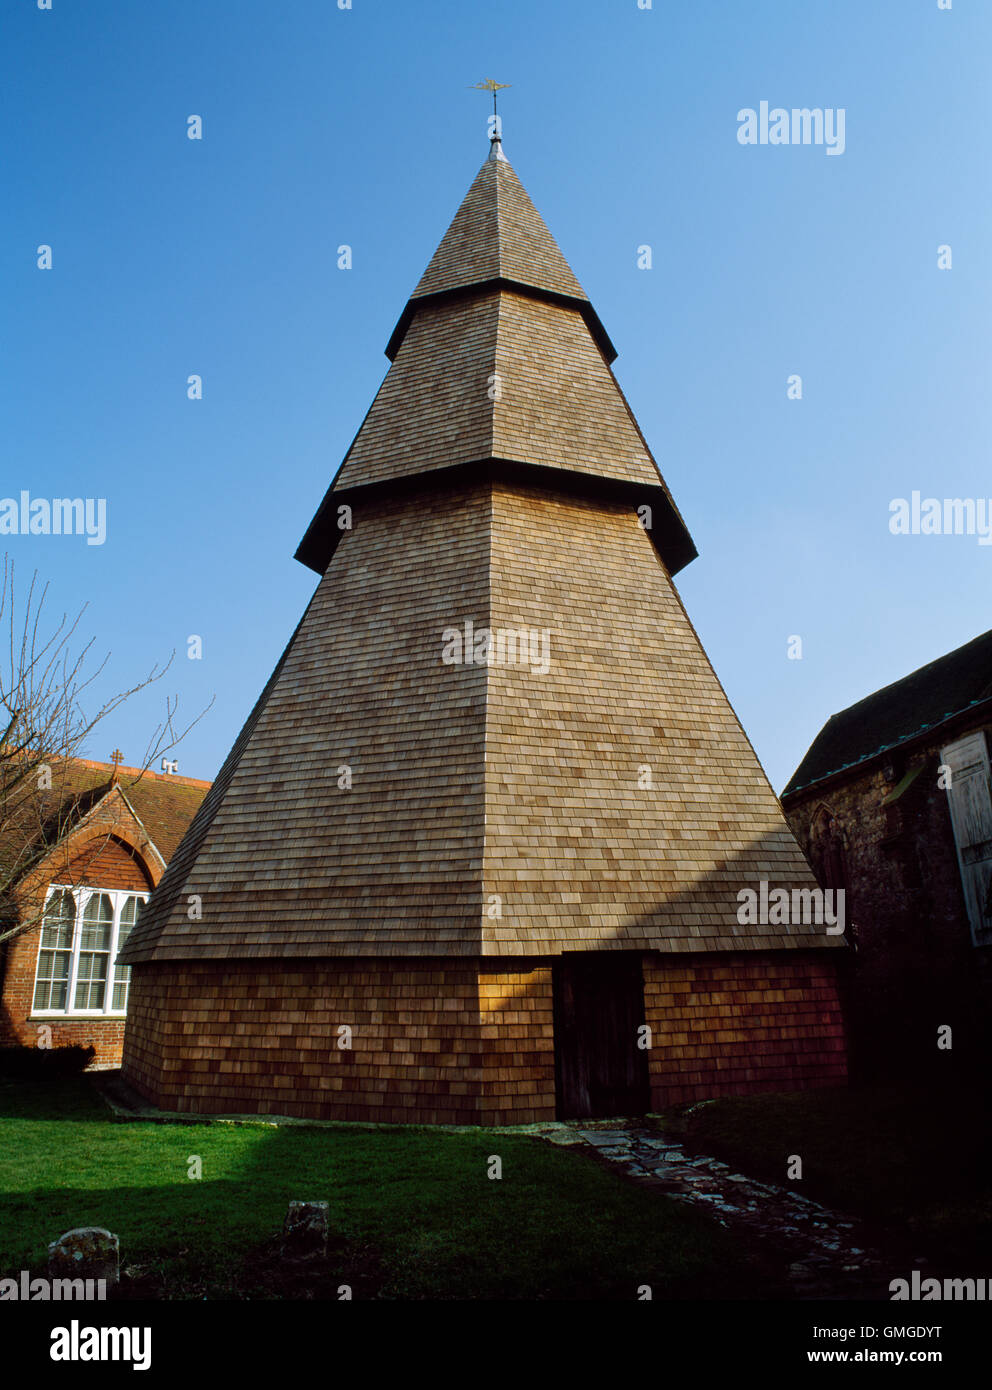 Detached wooden belfry tower of Brookland church, Kent, made up of 3 tiered octagonal pyramids: frame dates from c. 1260, shingles from 1991. Stock Photo